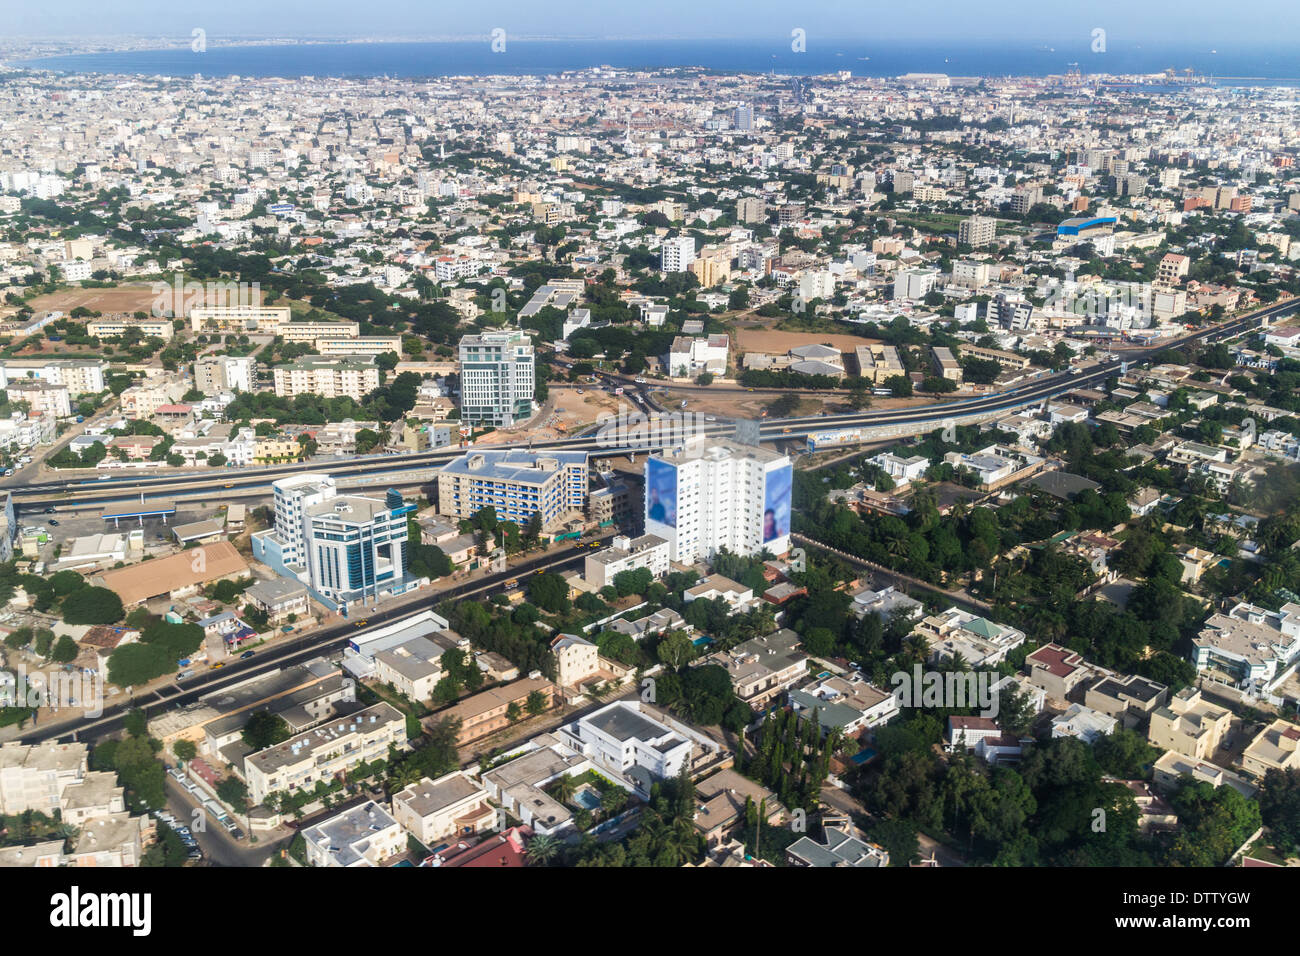 Aerial view of the city of Dakar, Senegal, showing the densely packed buildings and a highway Stock Photo